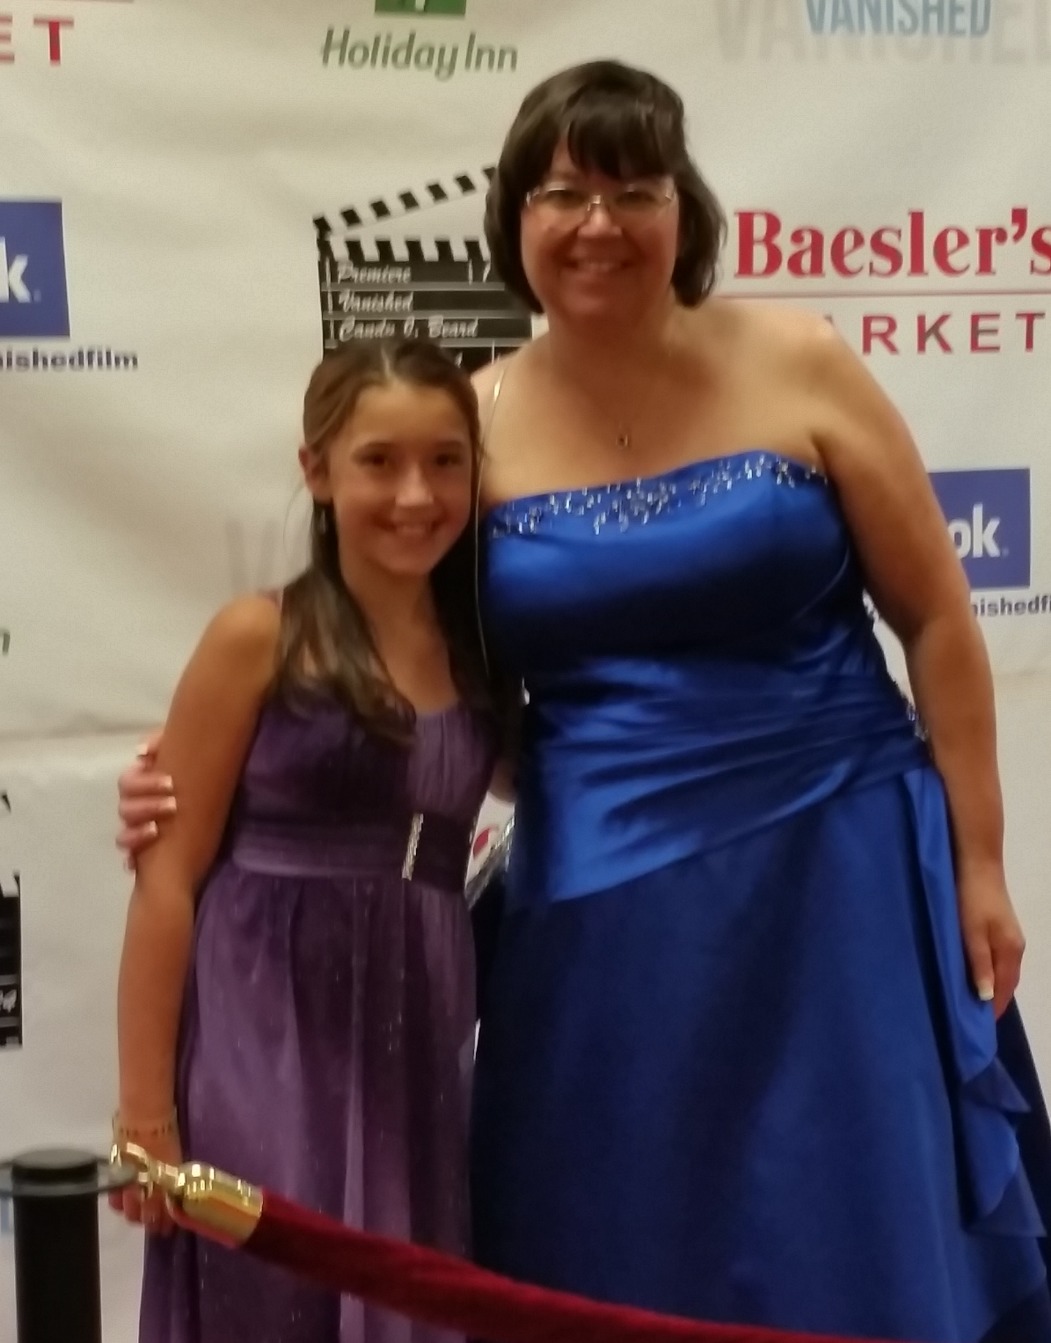 With Candy Beard at the Vanished Red carpet movie premiere.